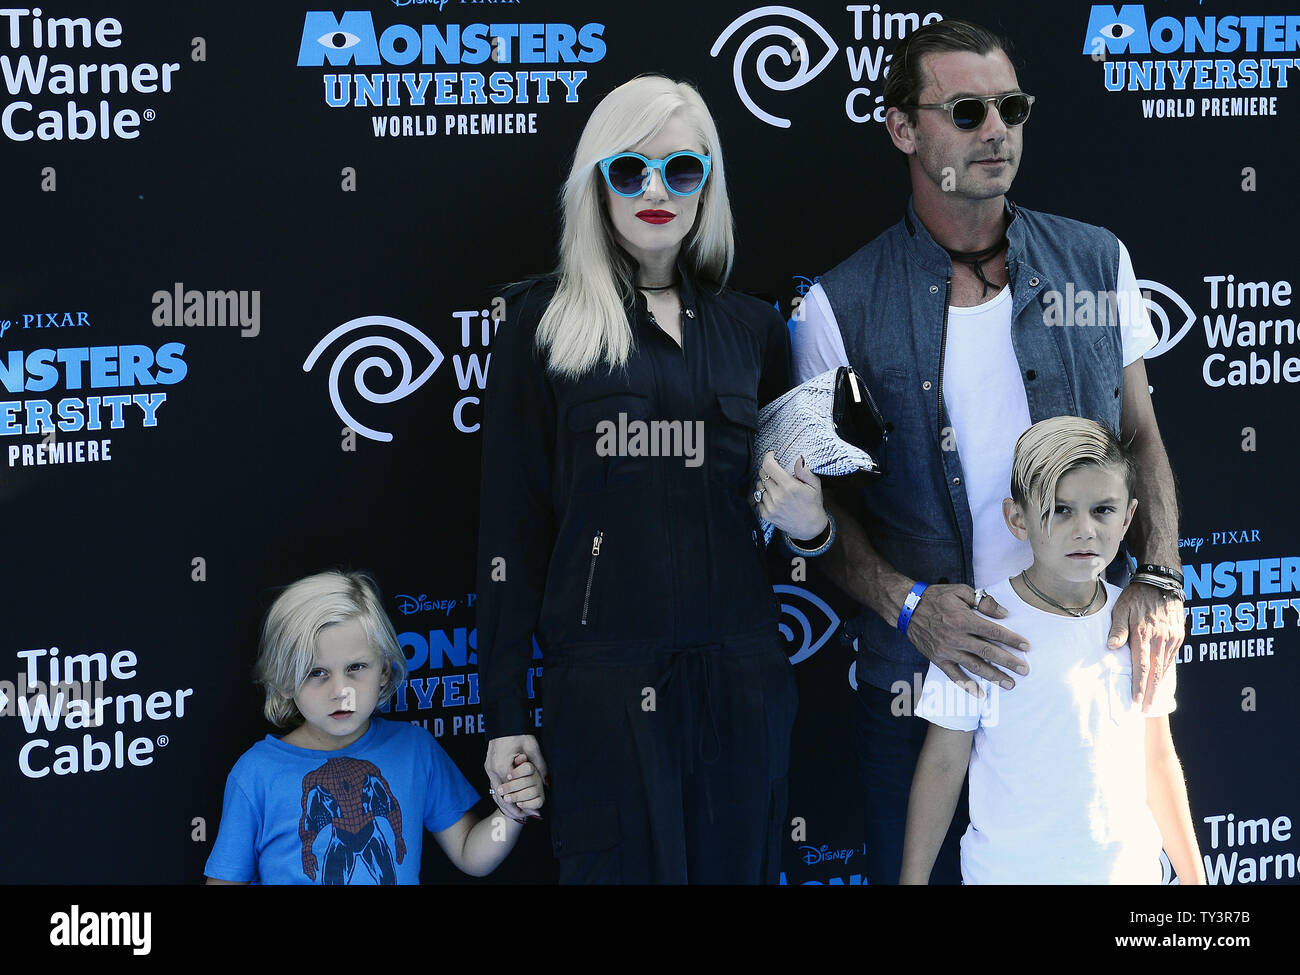 Singer-songwriter Gwen Stefani with husband Gavin Rossdale, and children Kingston Rossdale, and Zuma Nesta Rock Rossdale arrive for the 'Monsters University' premiere at the El Capitan Theatre in the Hollywood section of Los Angeles on June 17, 2013.     UPI/Jim Ruymen Stock Photo